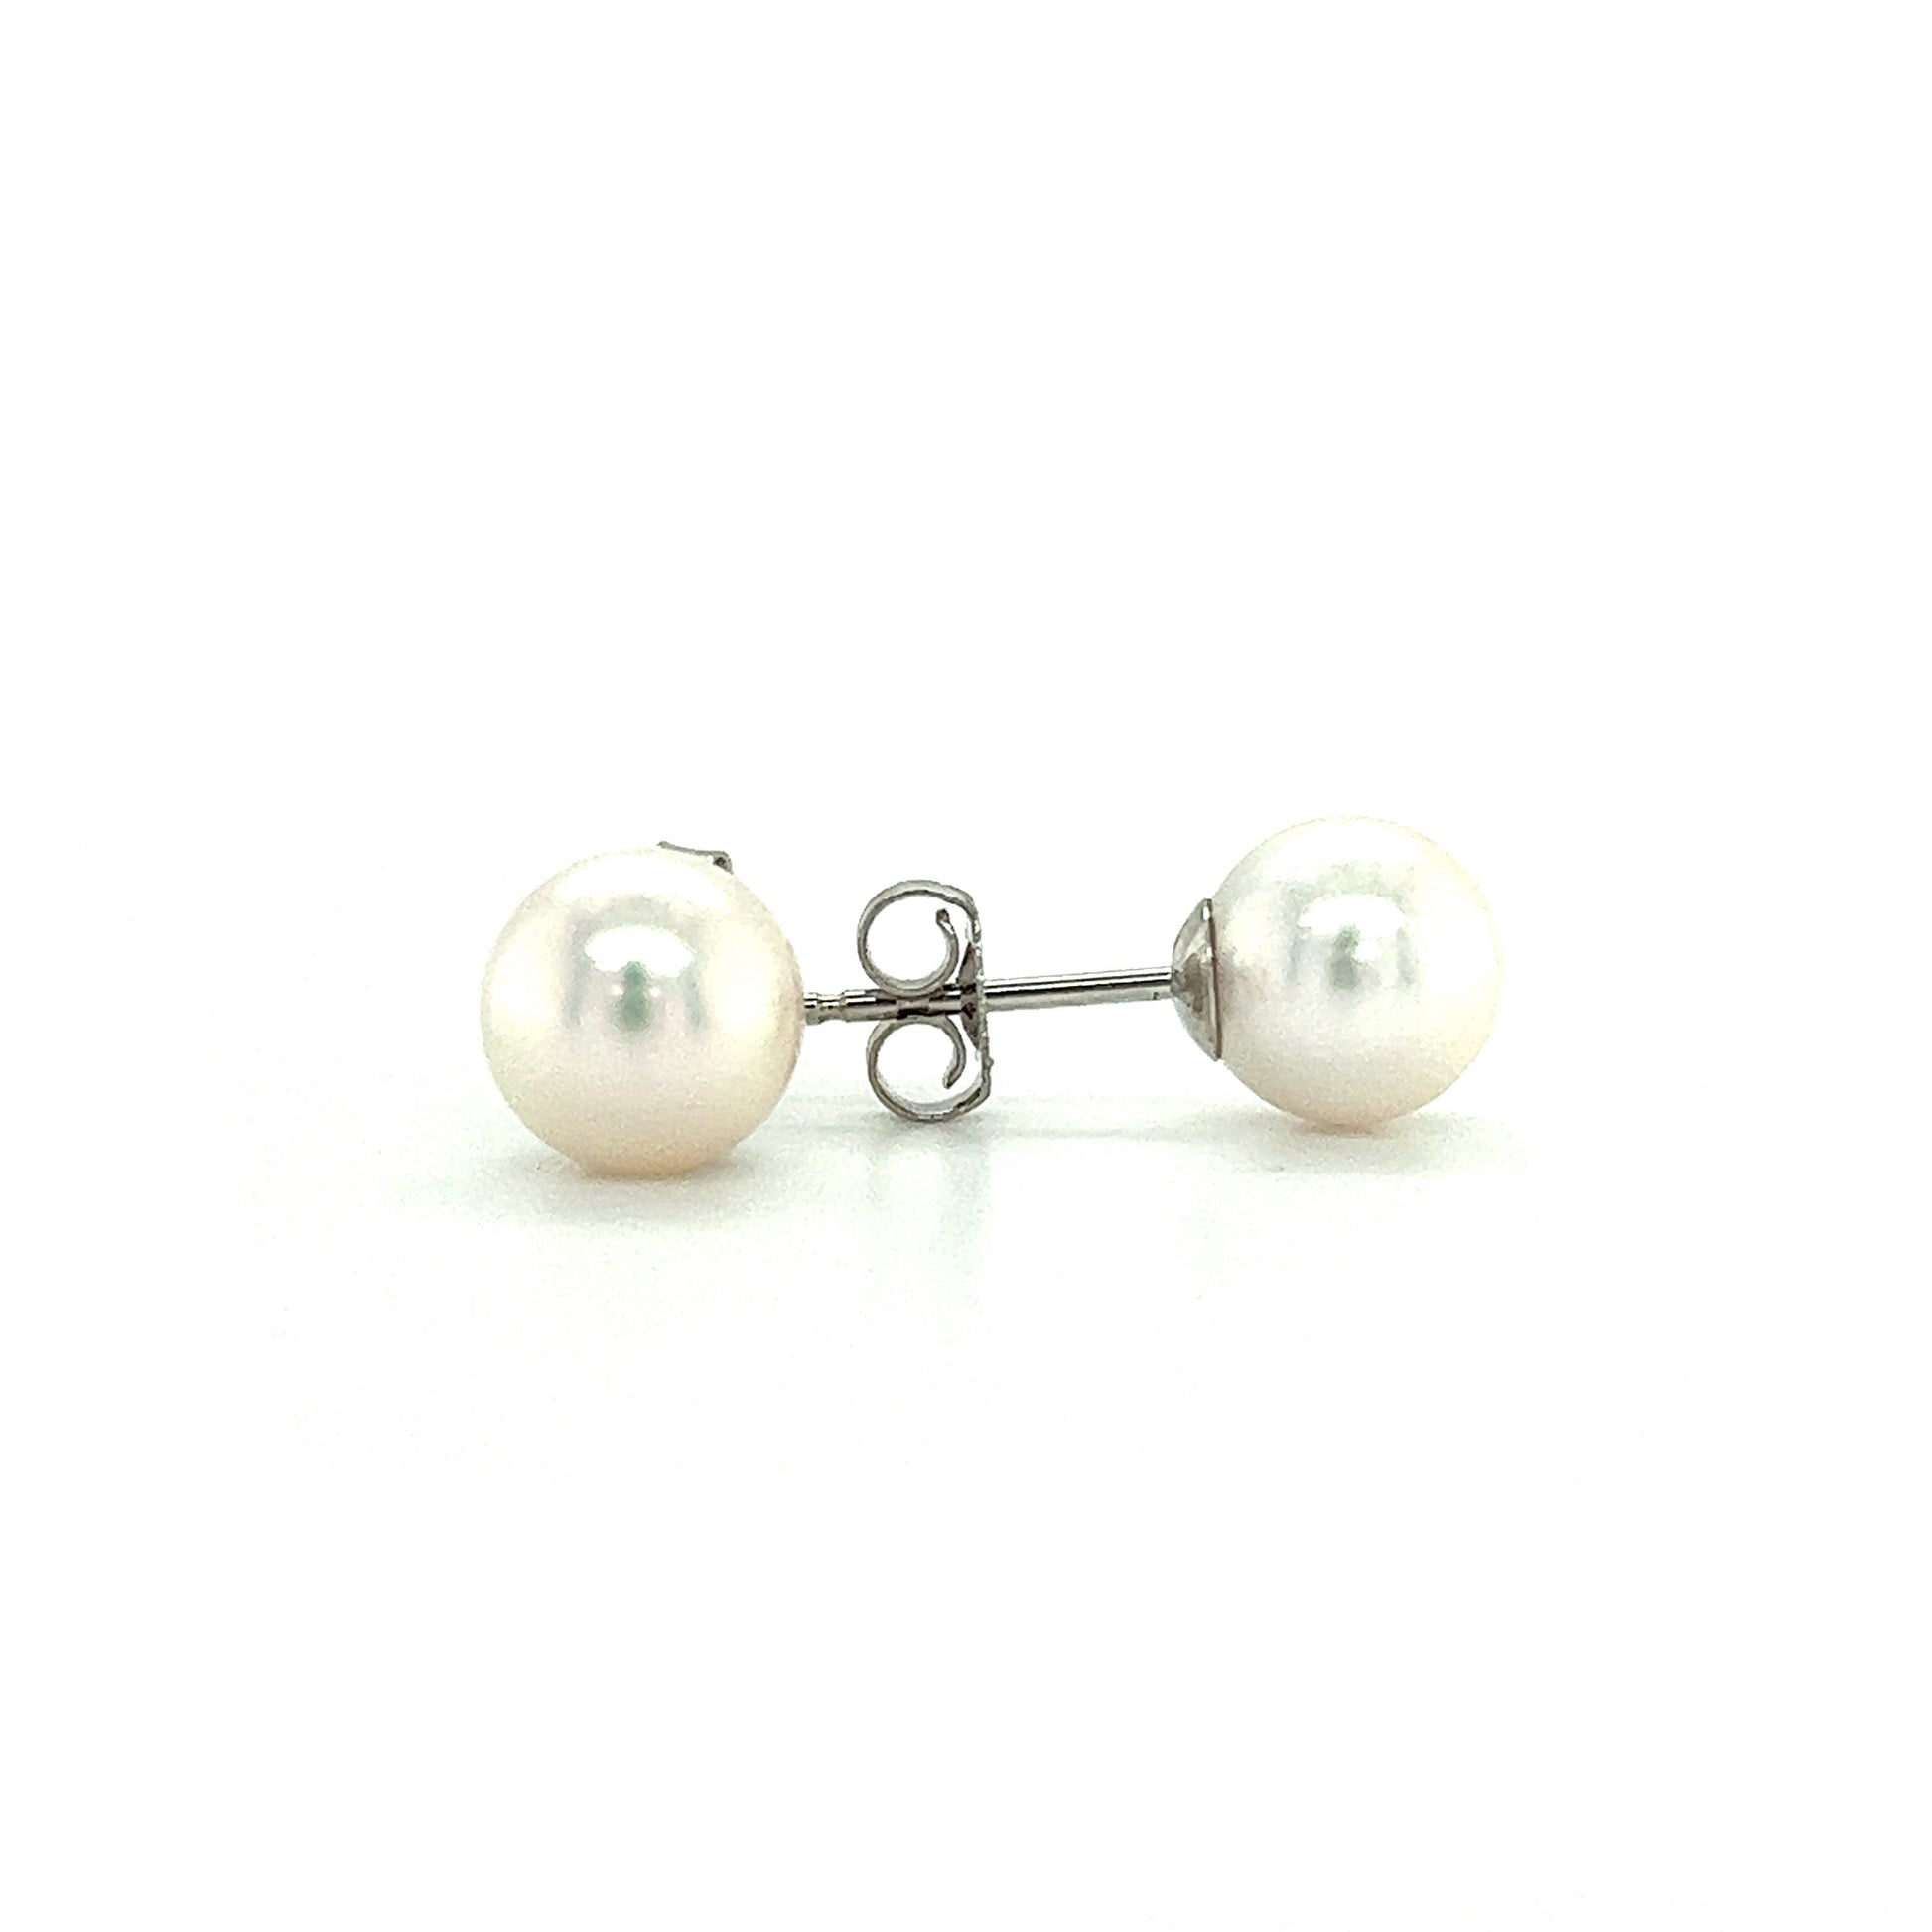 Pearl 7mm Stud Earrings in 14K Gold Front and Side View